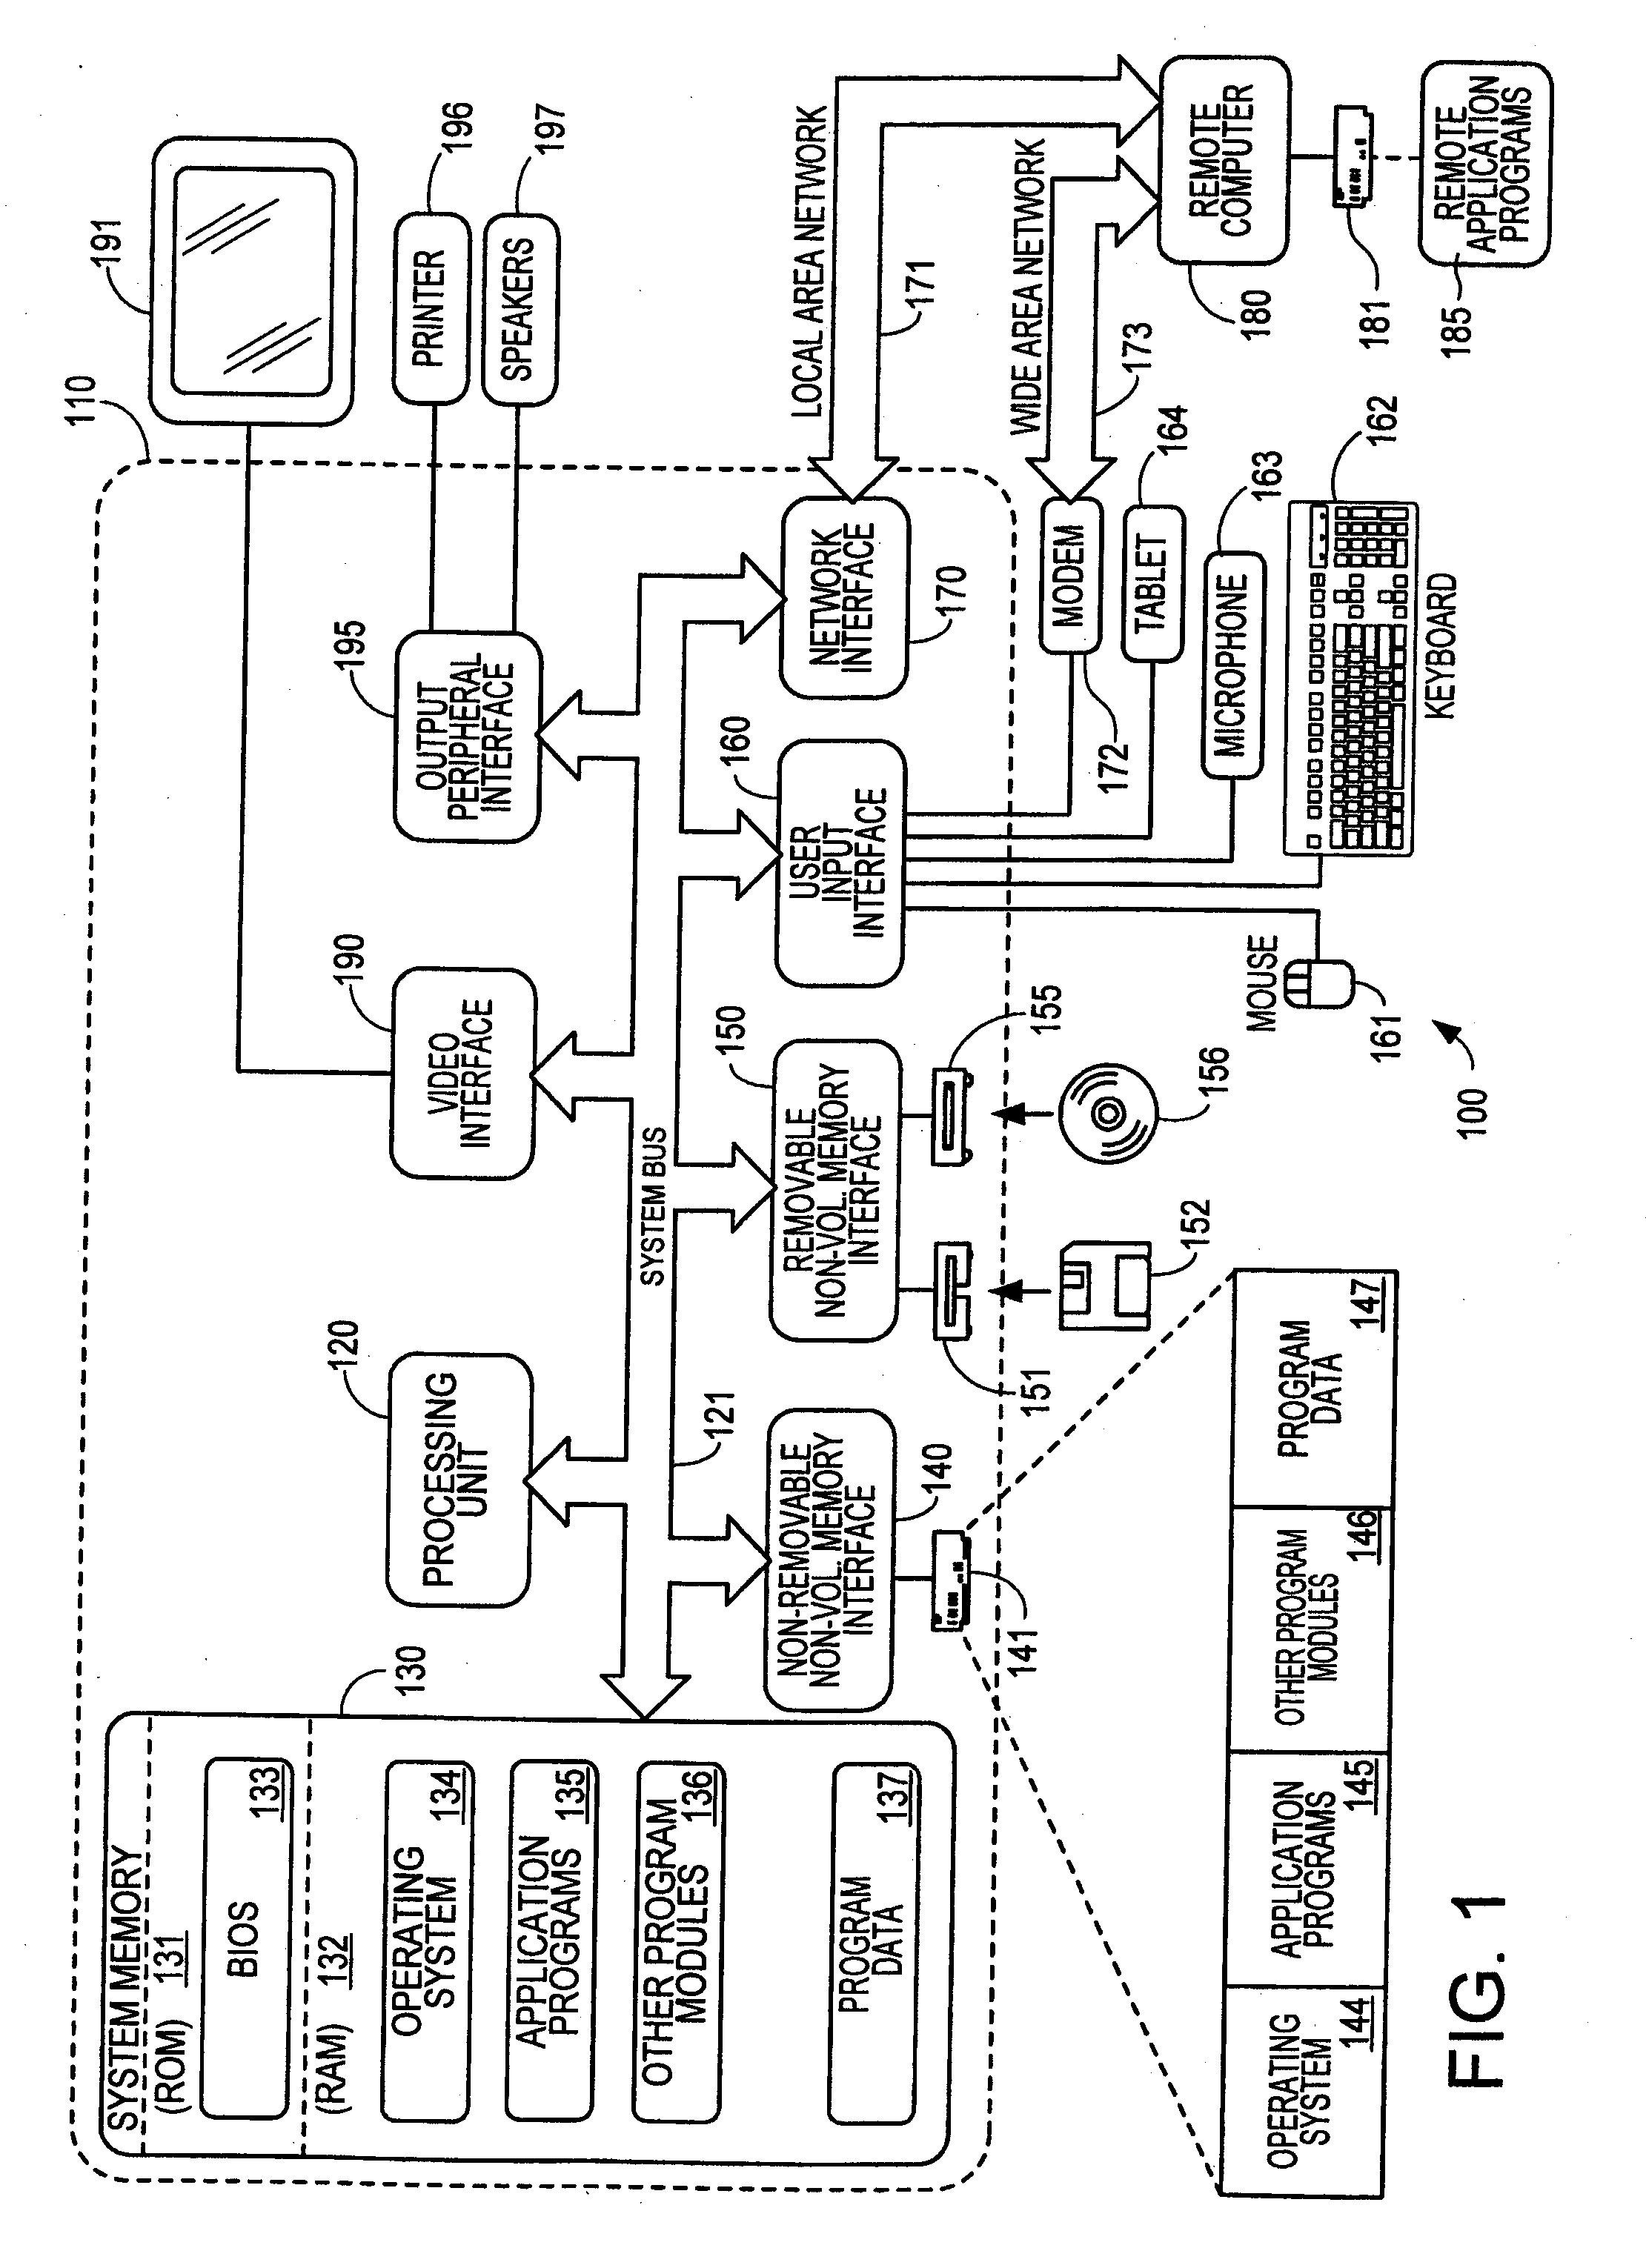 Controlled relay of media streams across network perimeters